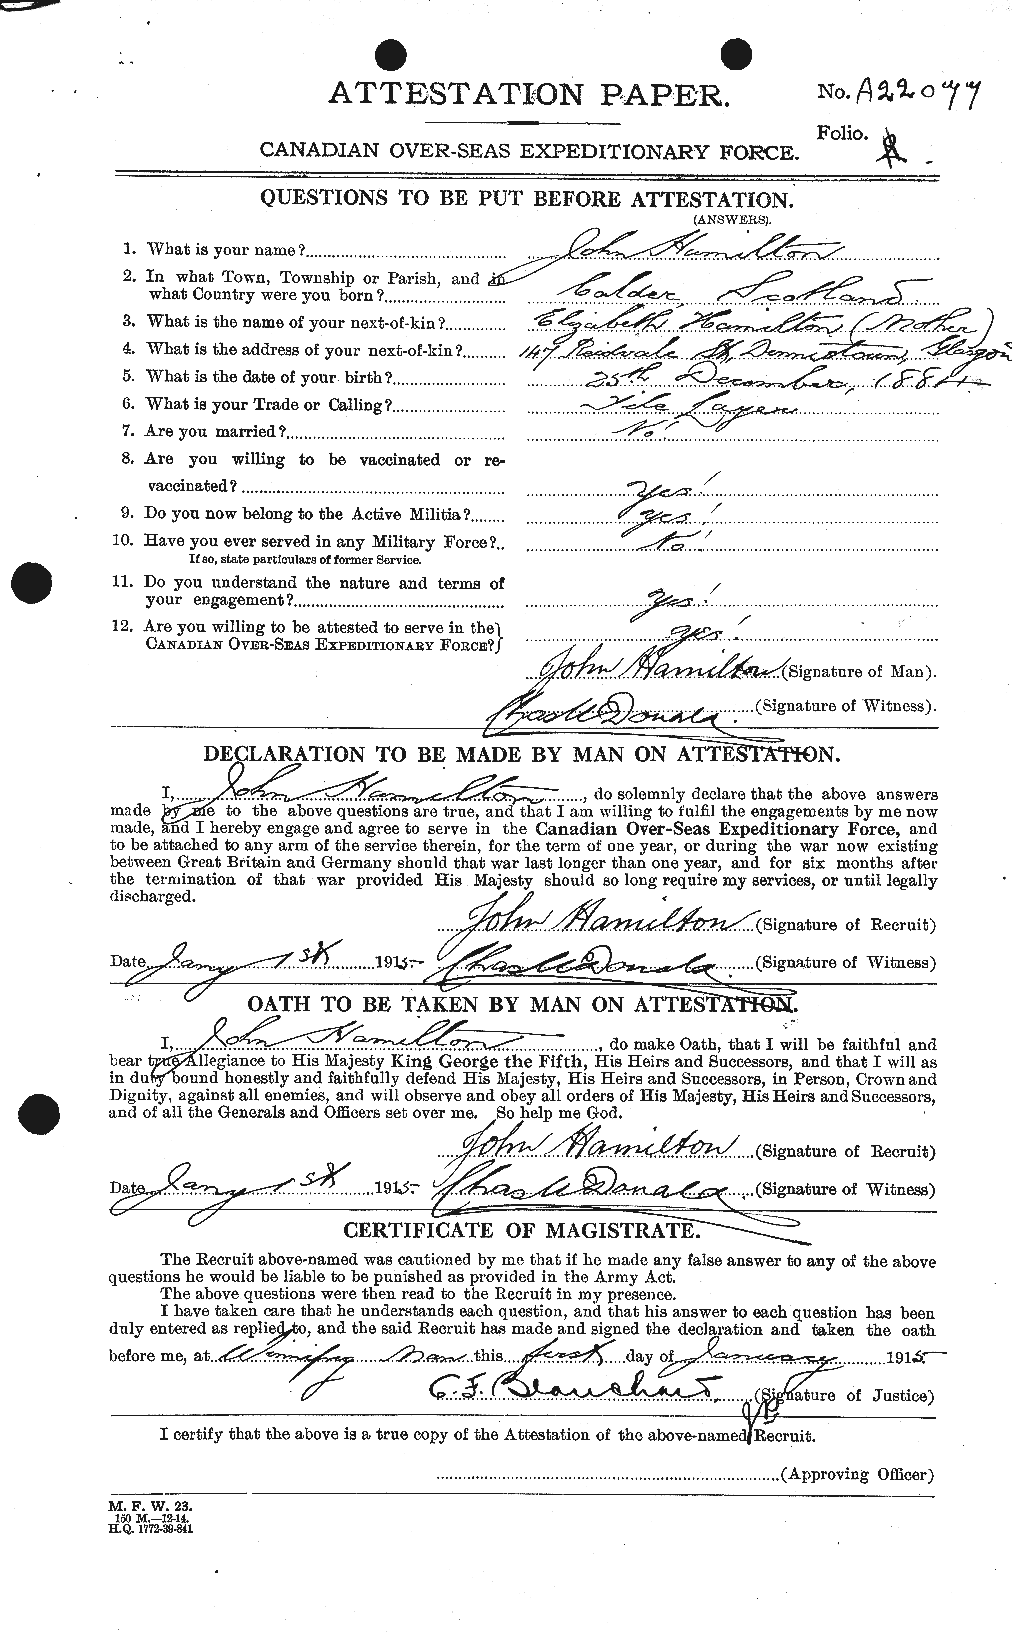 Personnel Records of the First World War - CEF 373037a